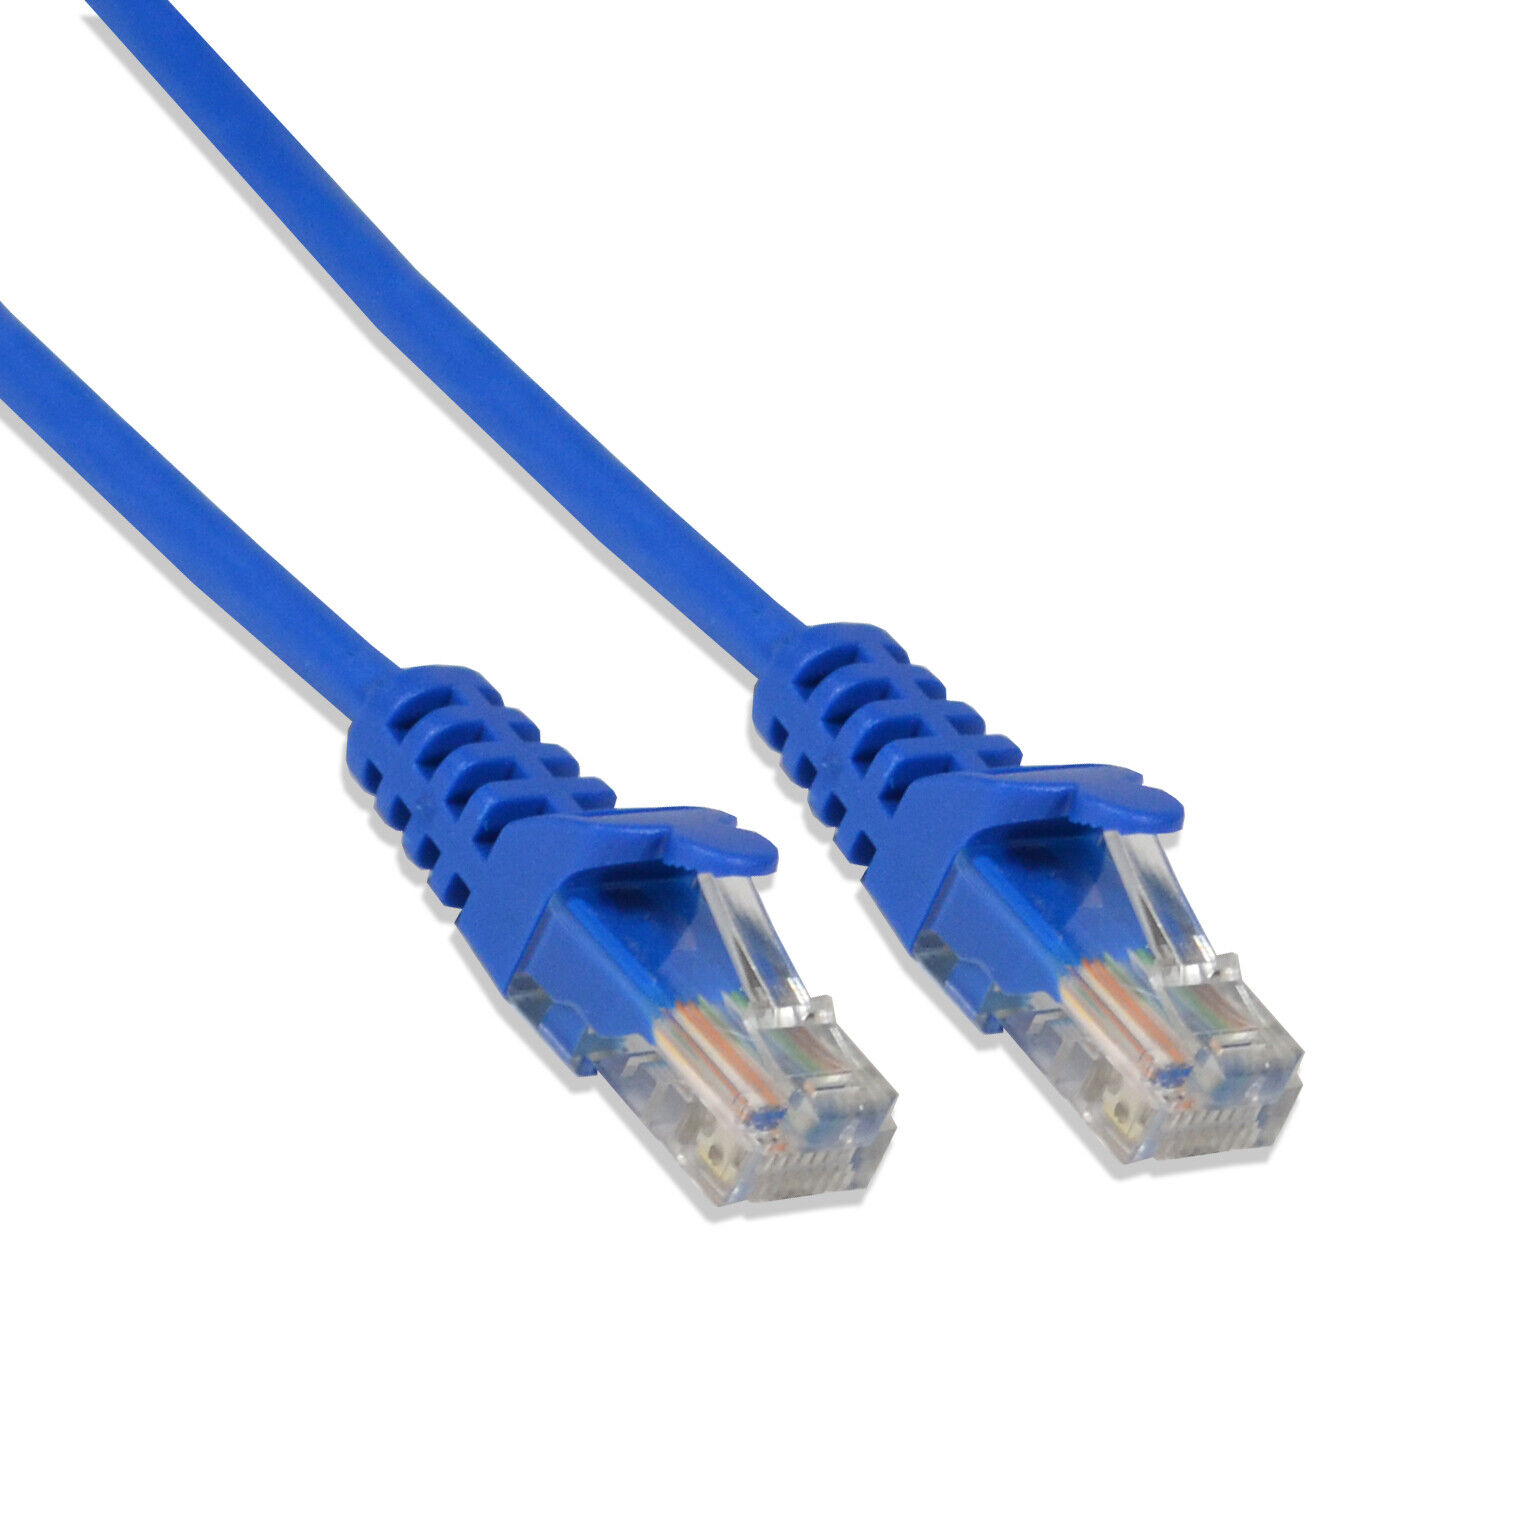 1FT Cat6 UTP Ethernet Network Patch Cable RJ45 Lan Wire Blue (25 Pack)